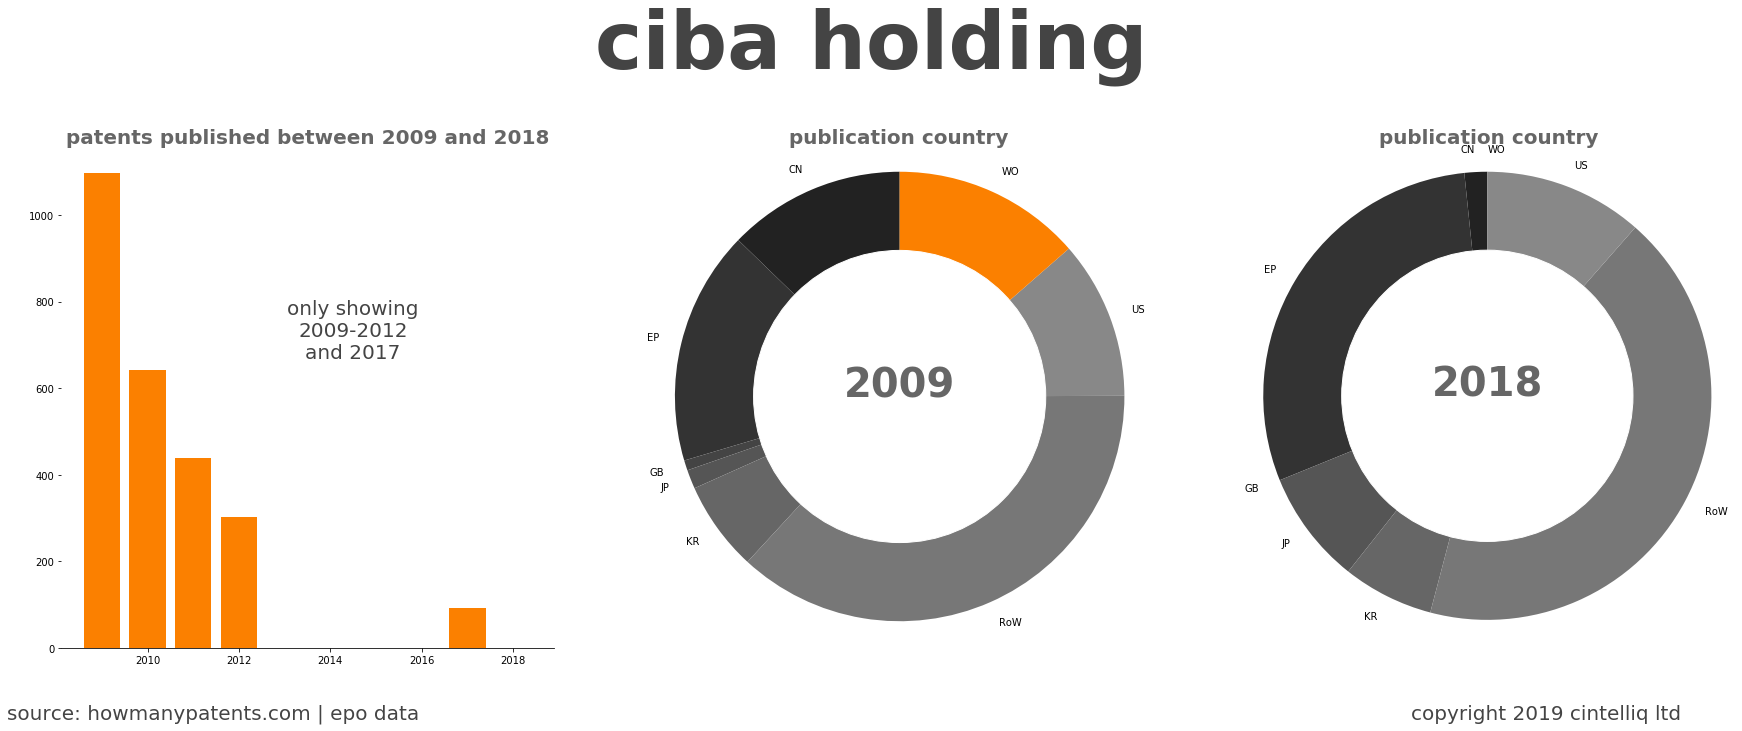 summary of patents for Ciba Holding